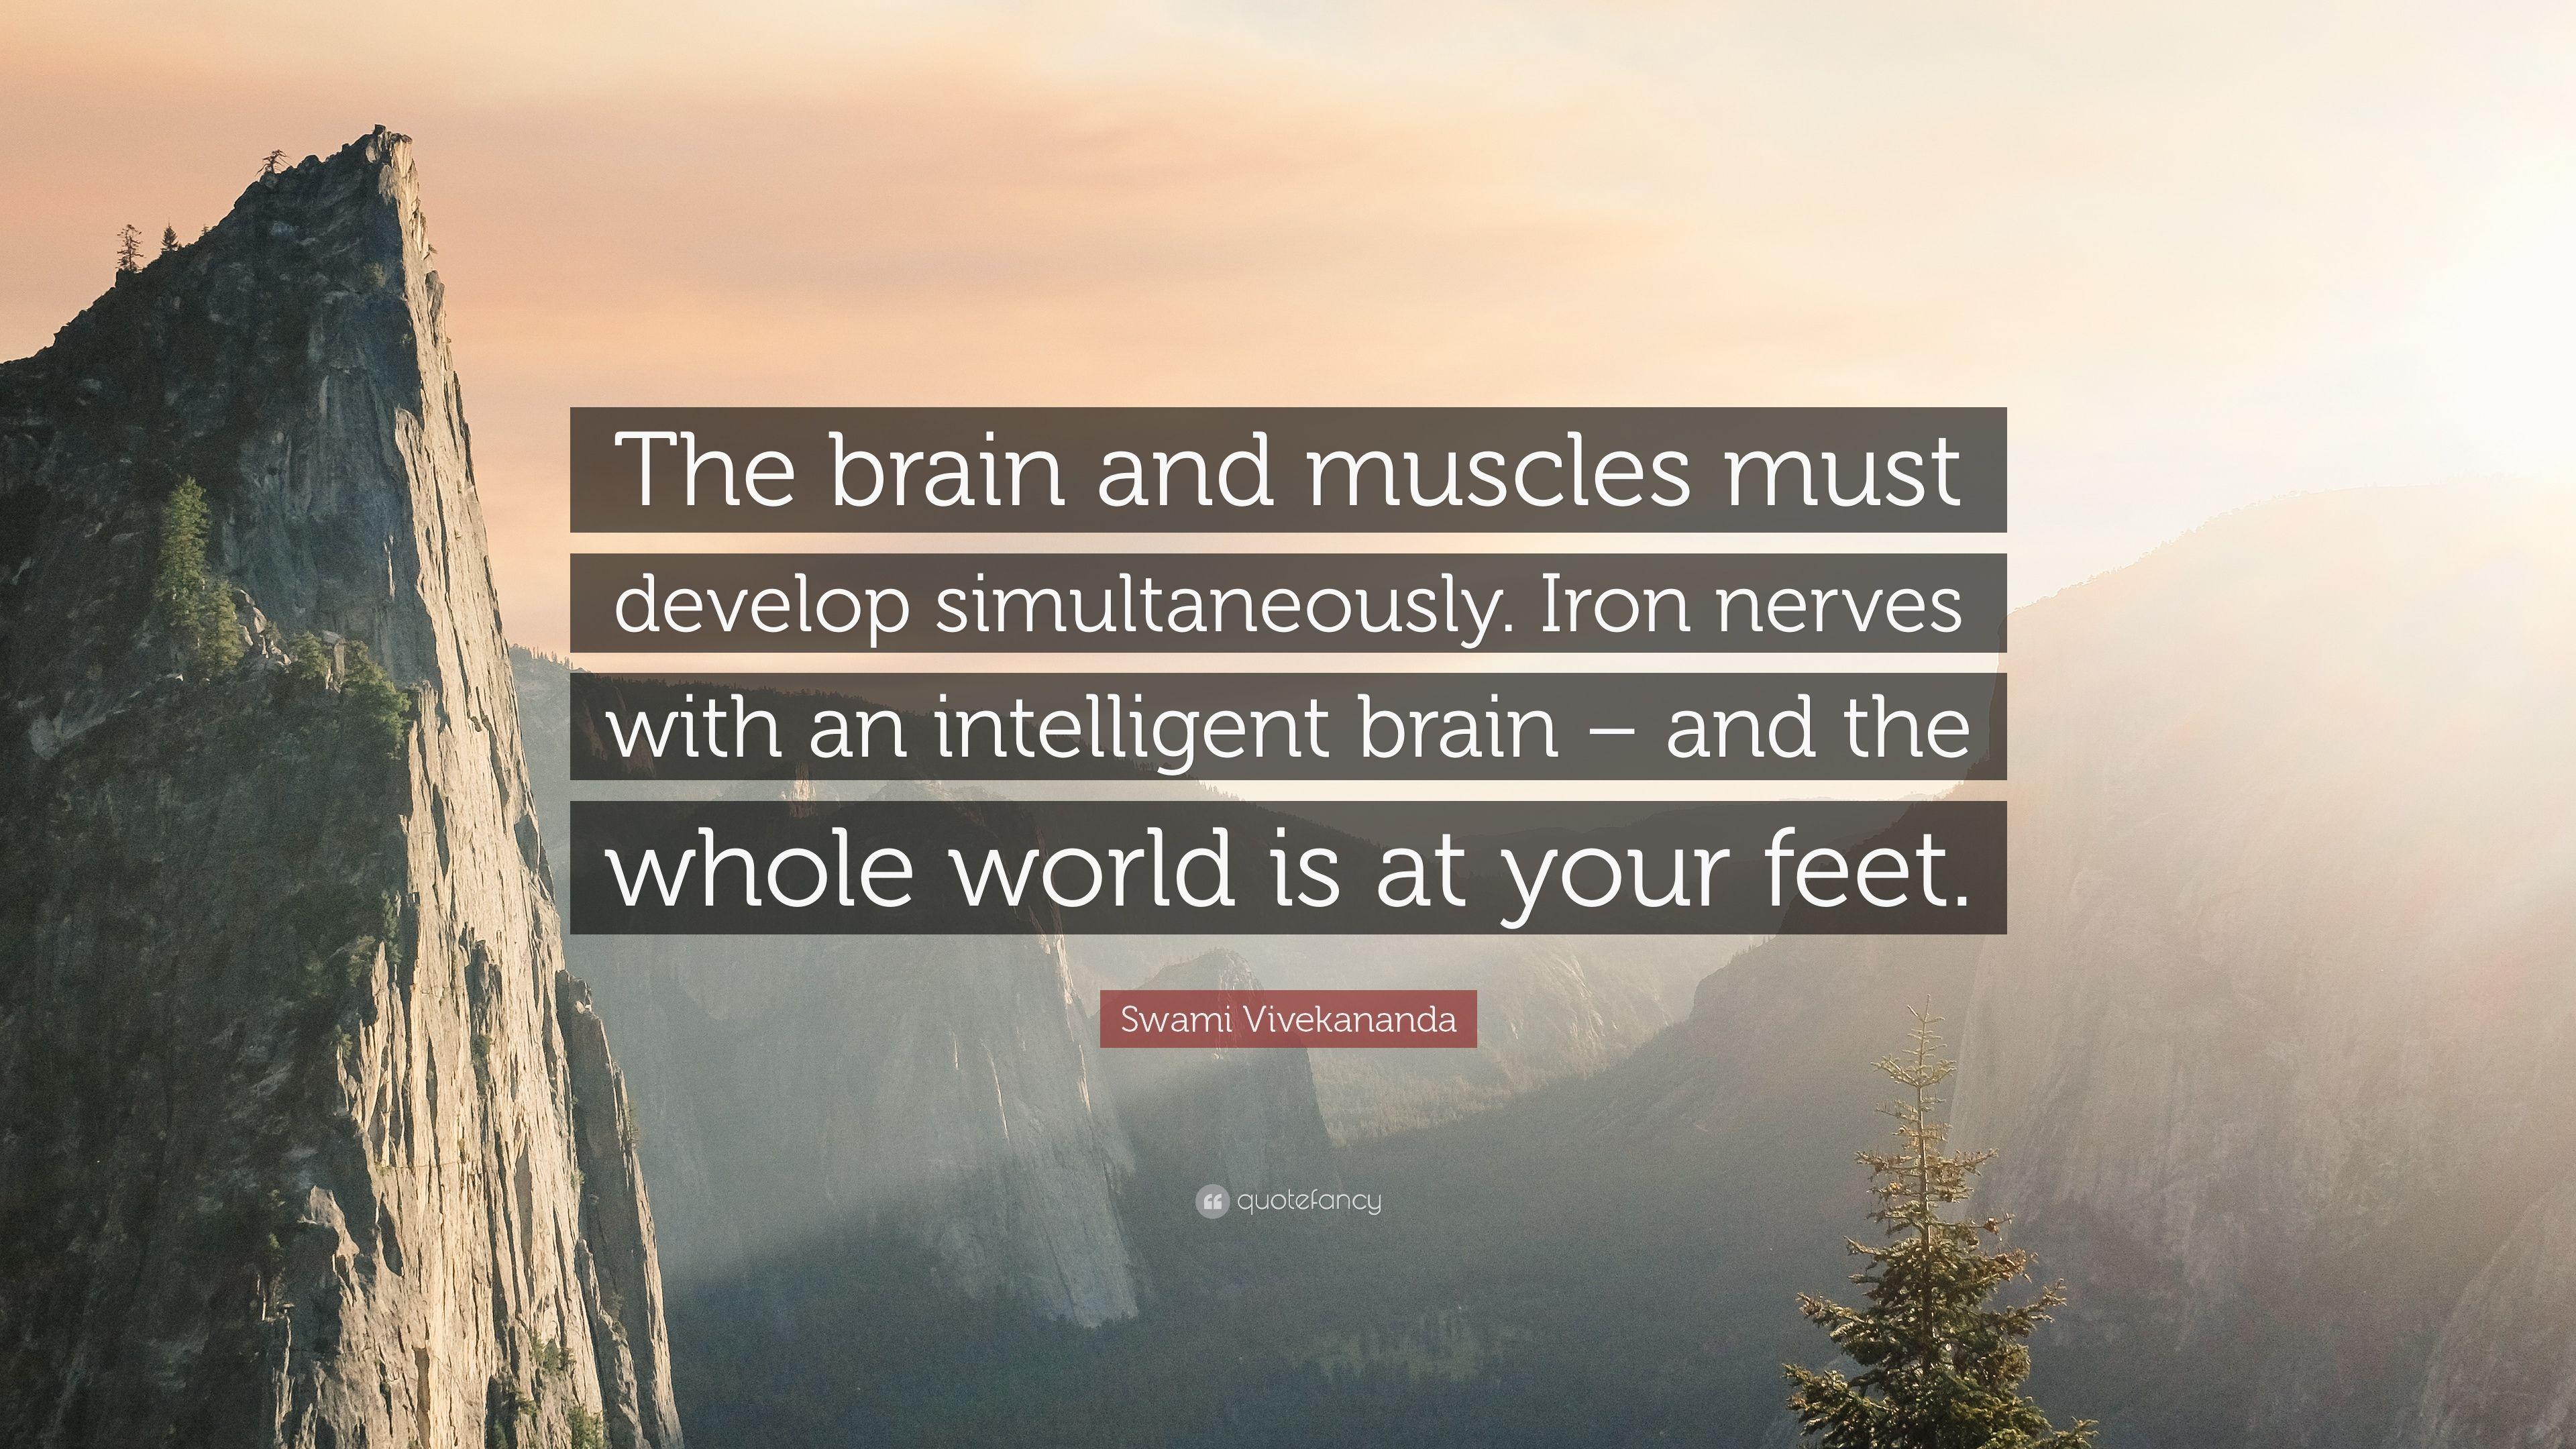 Swami Vivekananda Quote: “The brain and muscles must develop